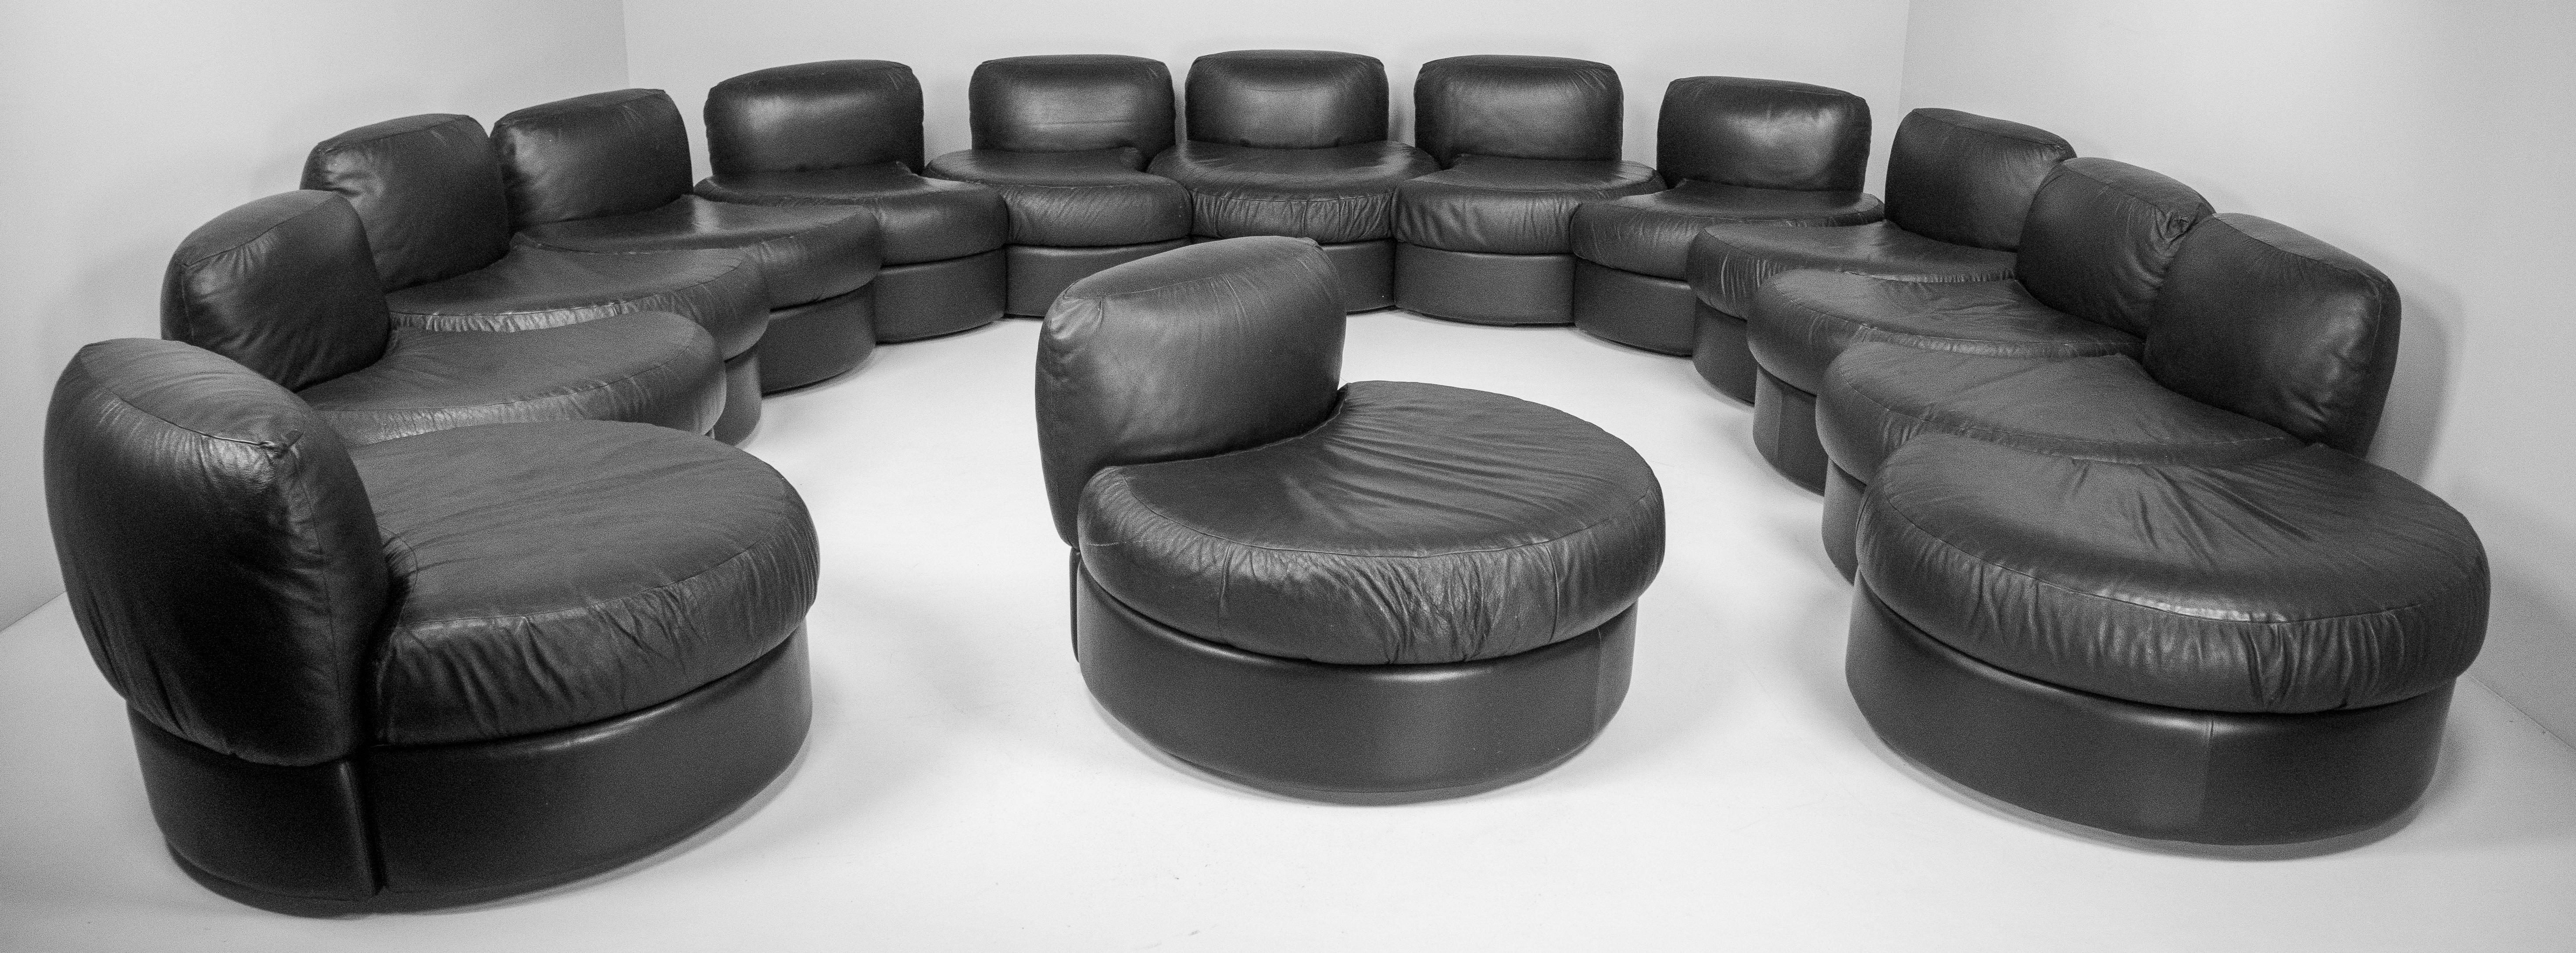 An absolutely amazing and extremely impressive vintage leather sectional sofa set, this was made by the manufacturer Tecnosalotto Mantova Italy, it dates from circa 1970s. This is of the utmost quality, and it is in good vintage condition for its